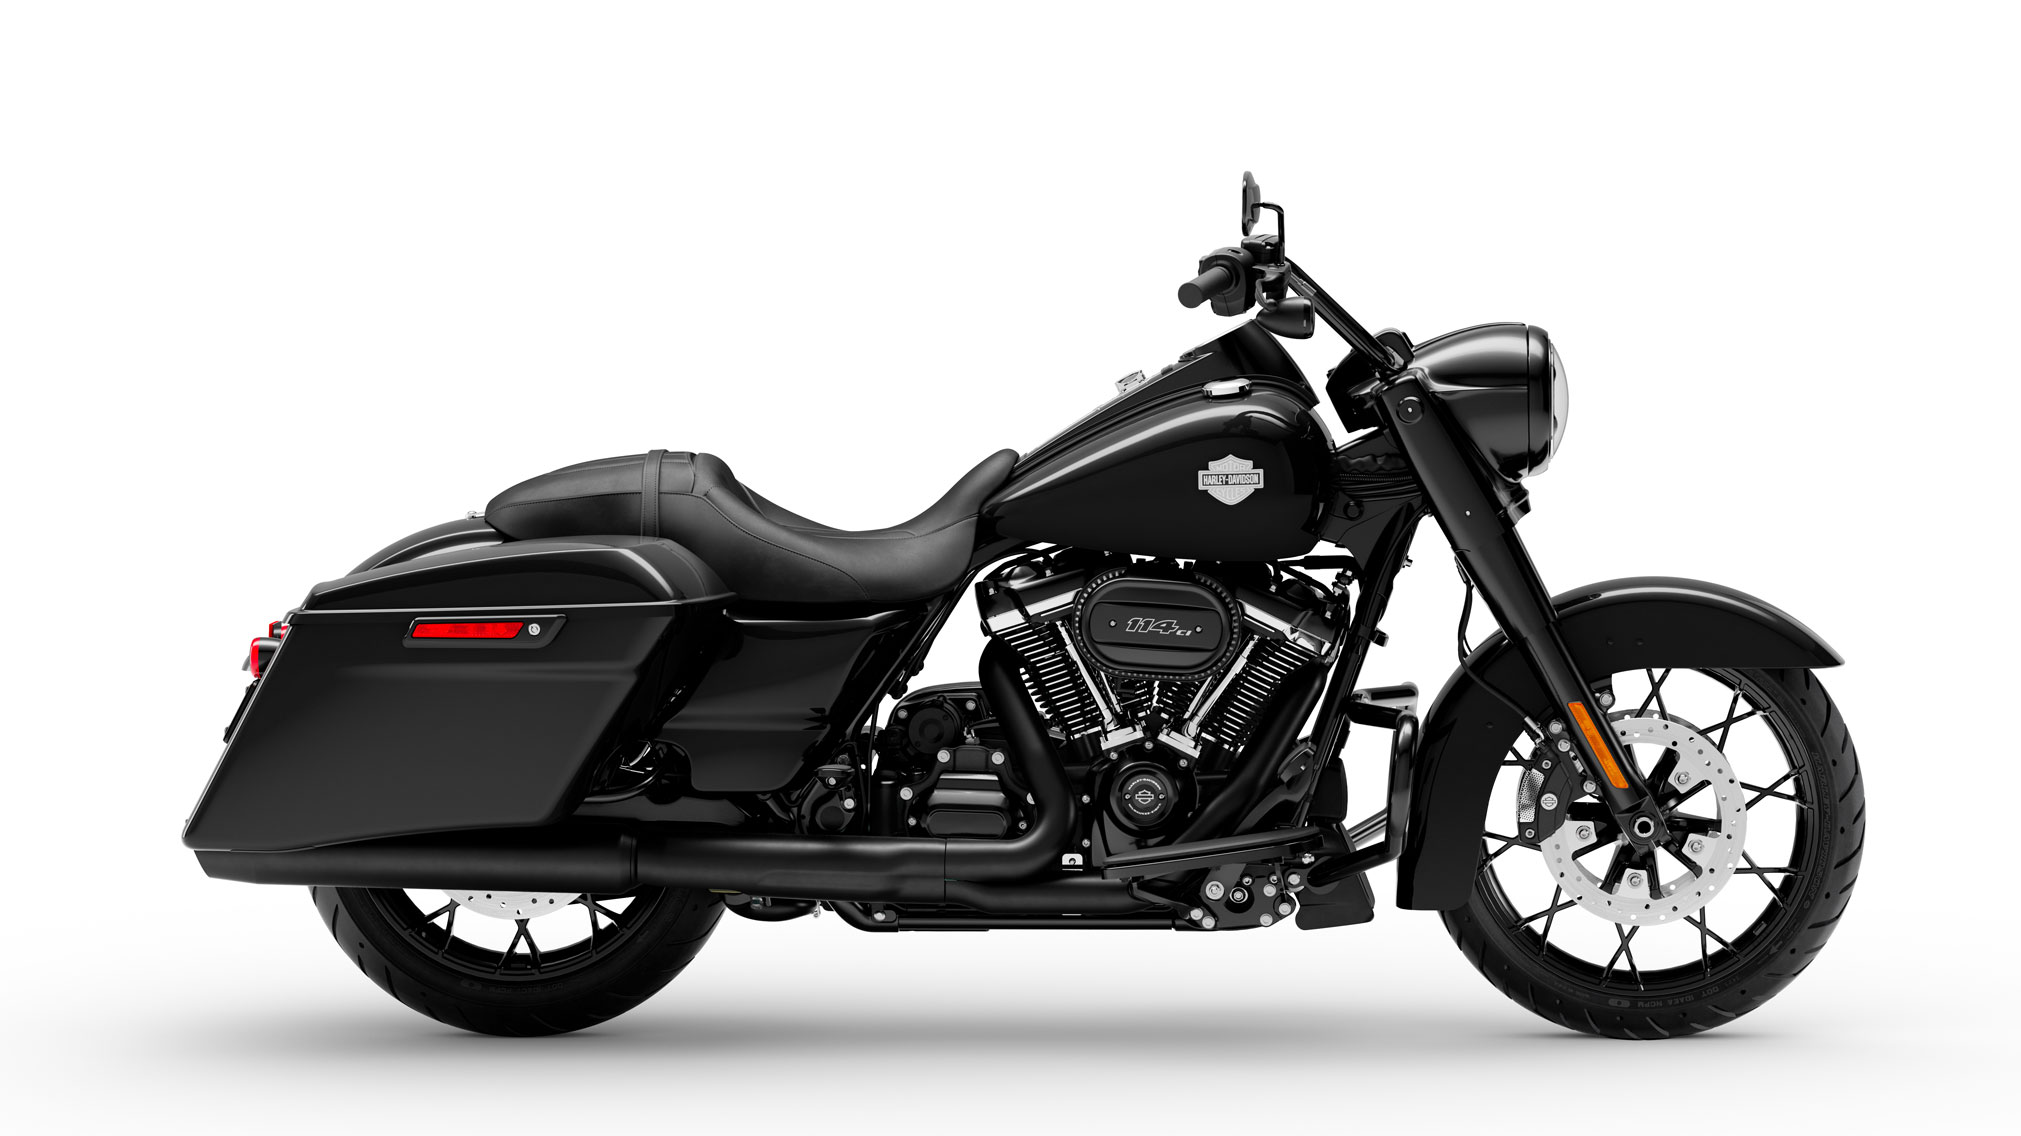 2021 Harley-Davidson Road King Special Guide • Total Motorcycle